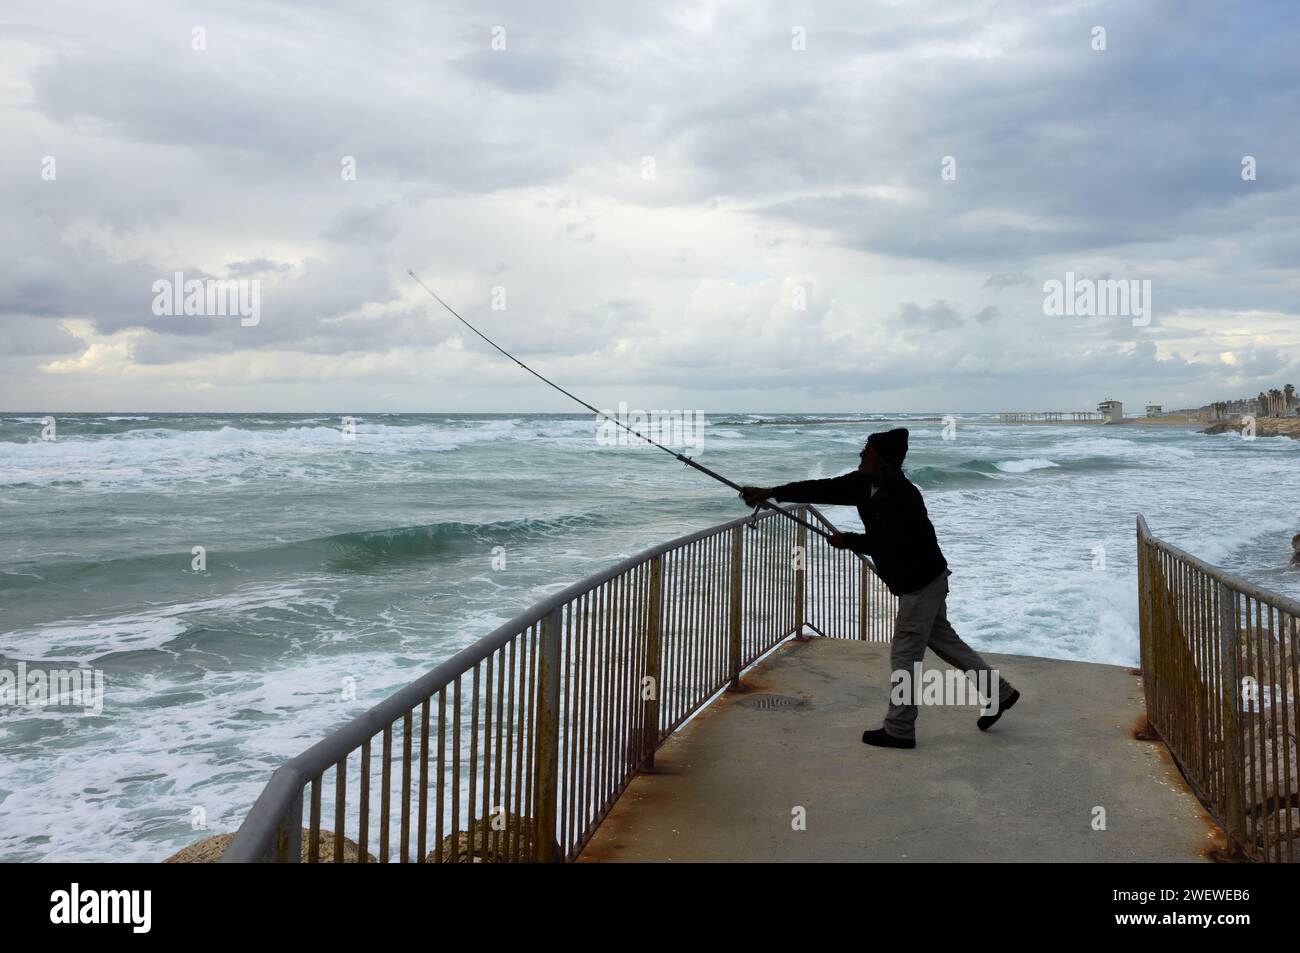 fisherman catches fish at sea in stormy weather Stock Photo